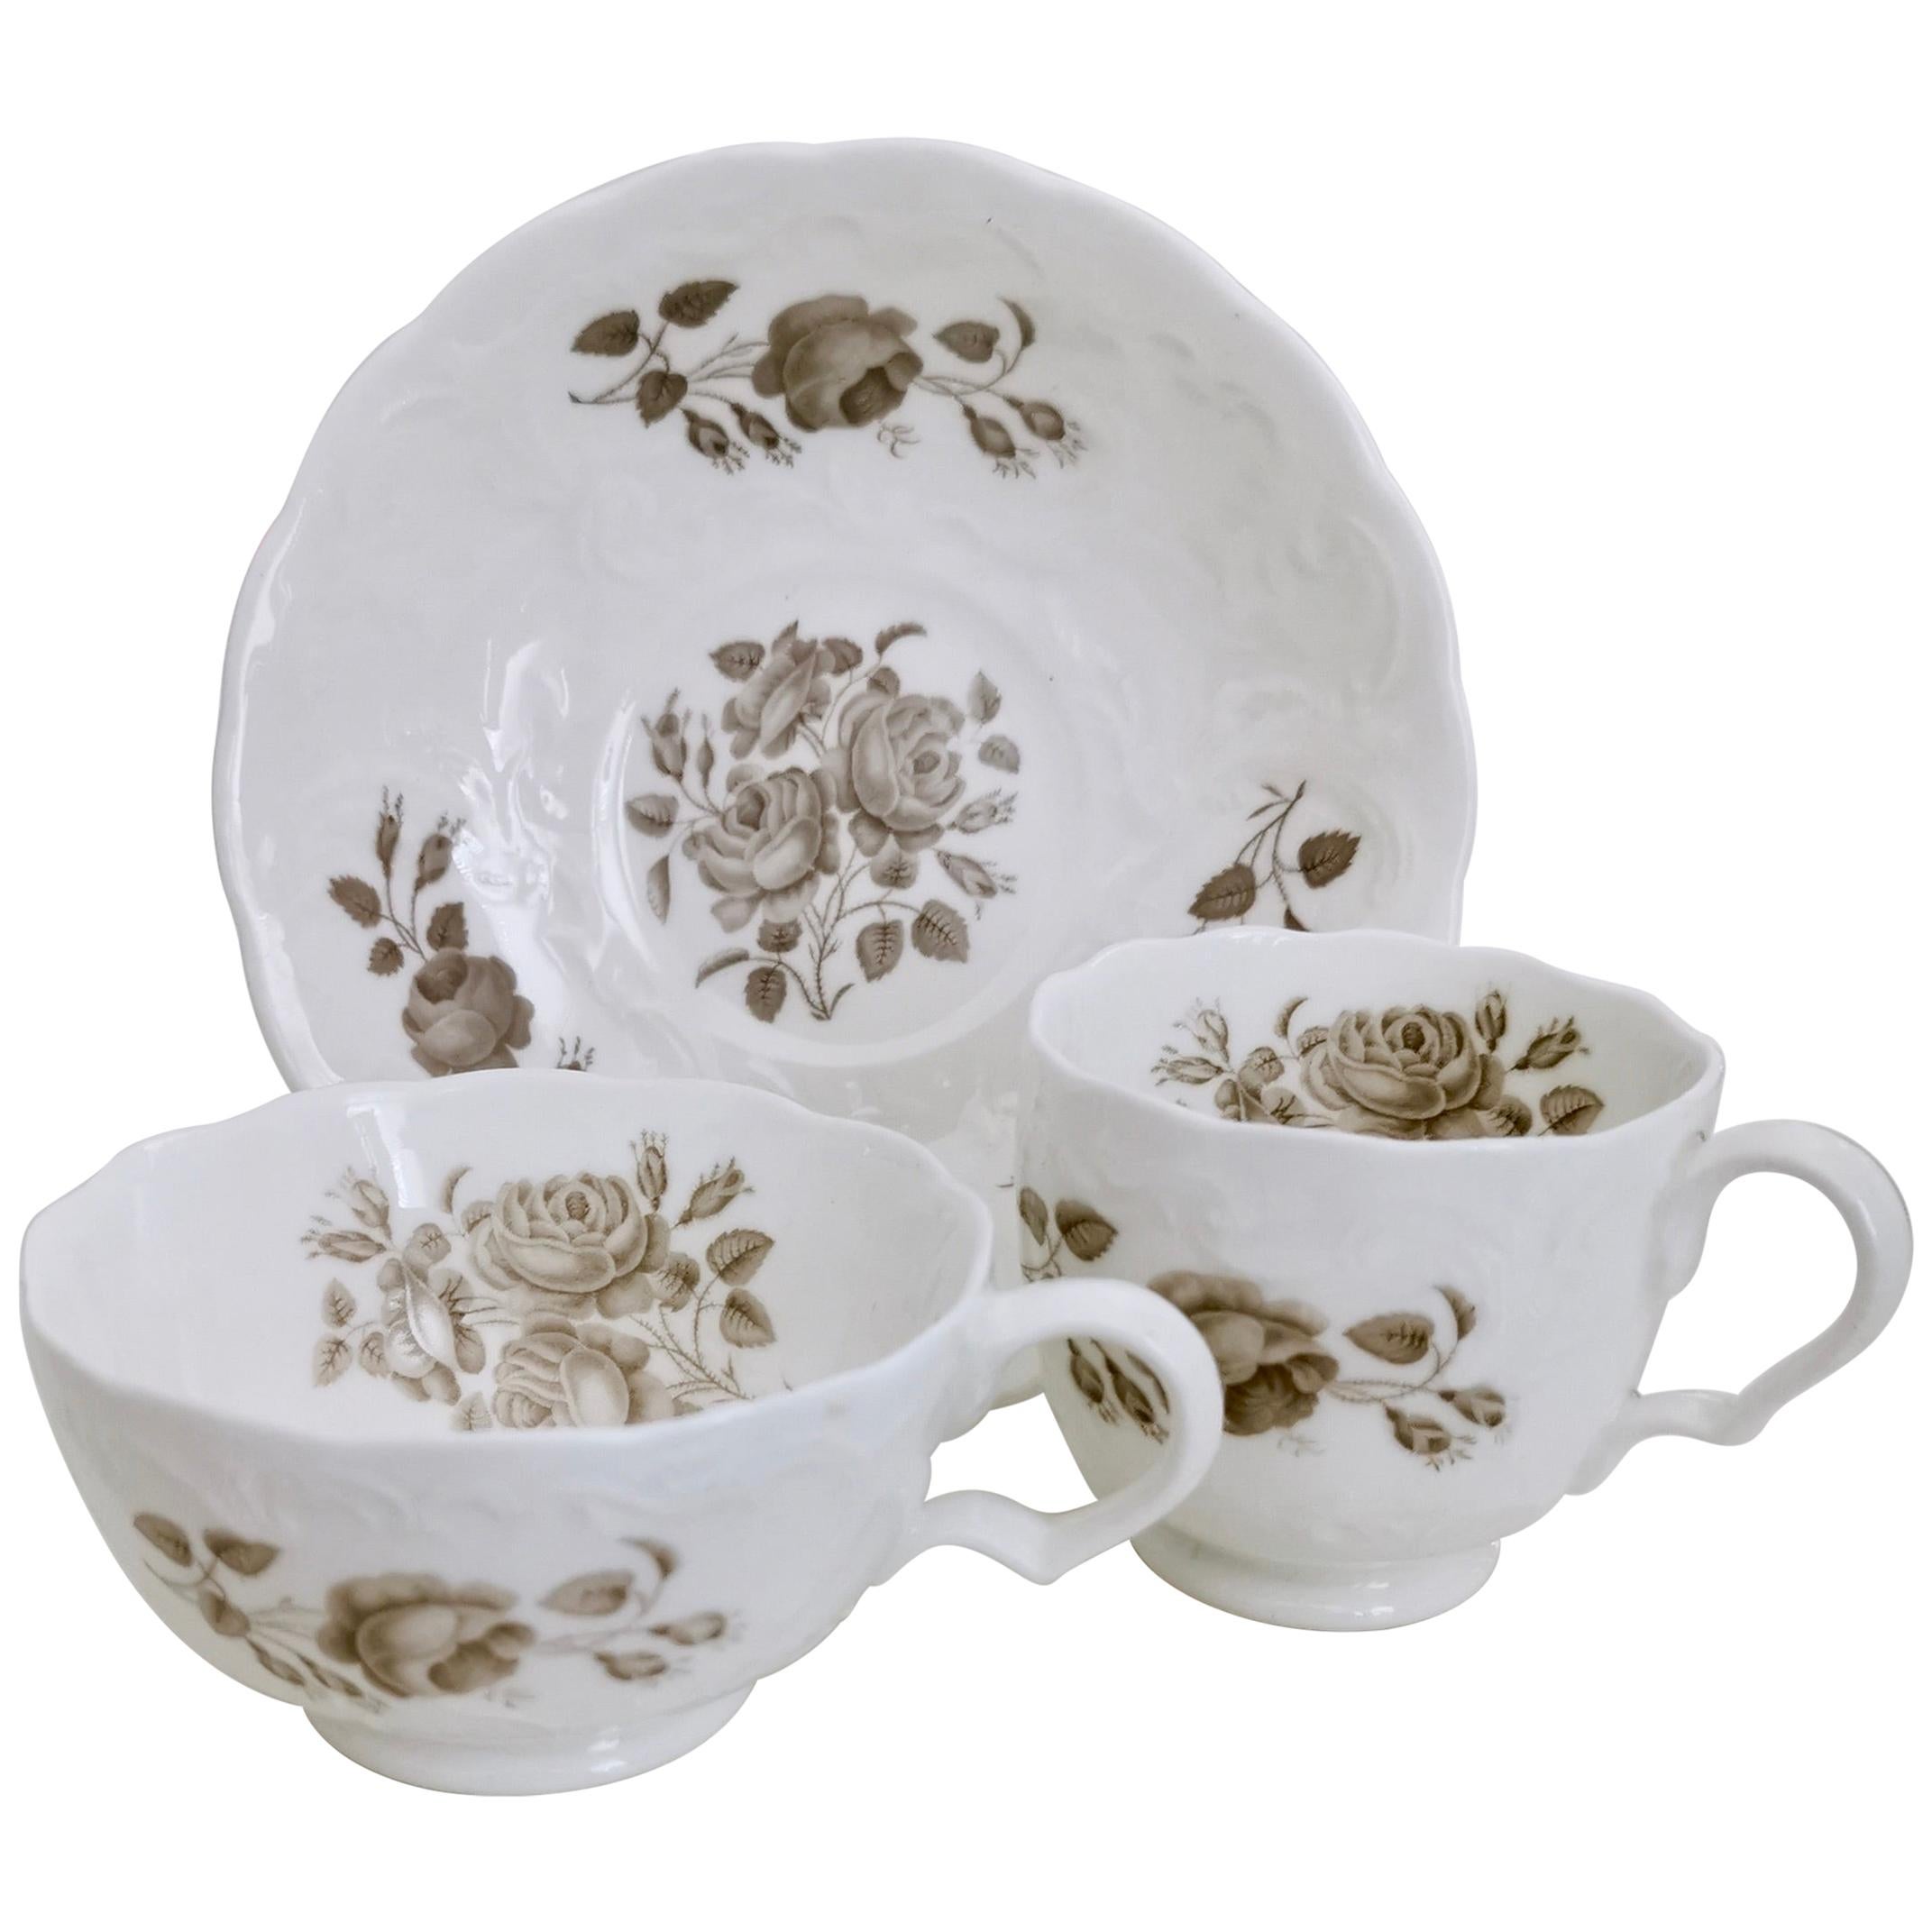 Minton Porcelain Teacup Trio, Bath Embossed White with Sepia Roses, Regency 1830 For Sale